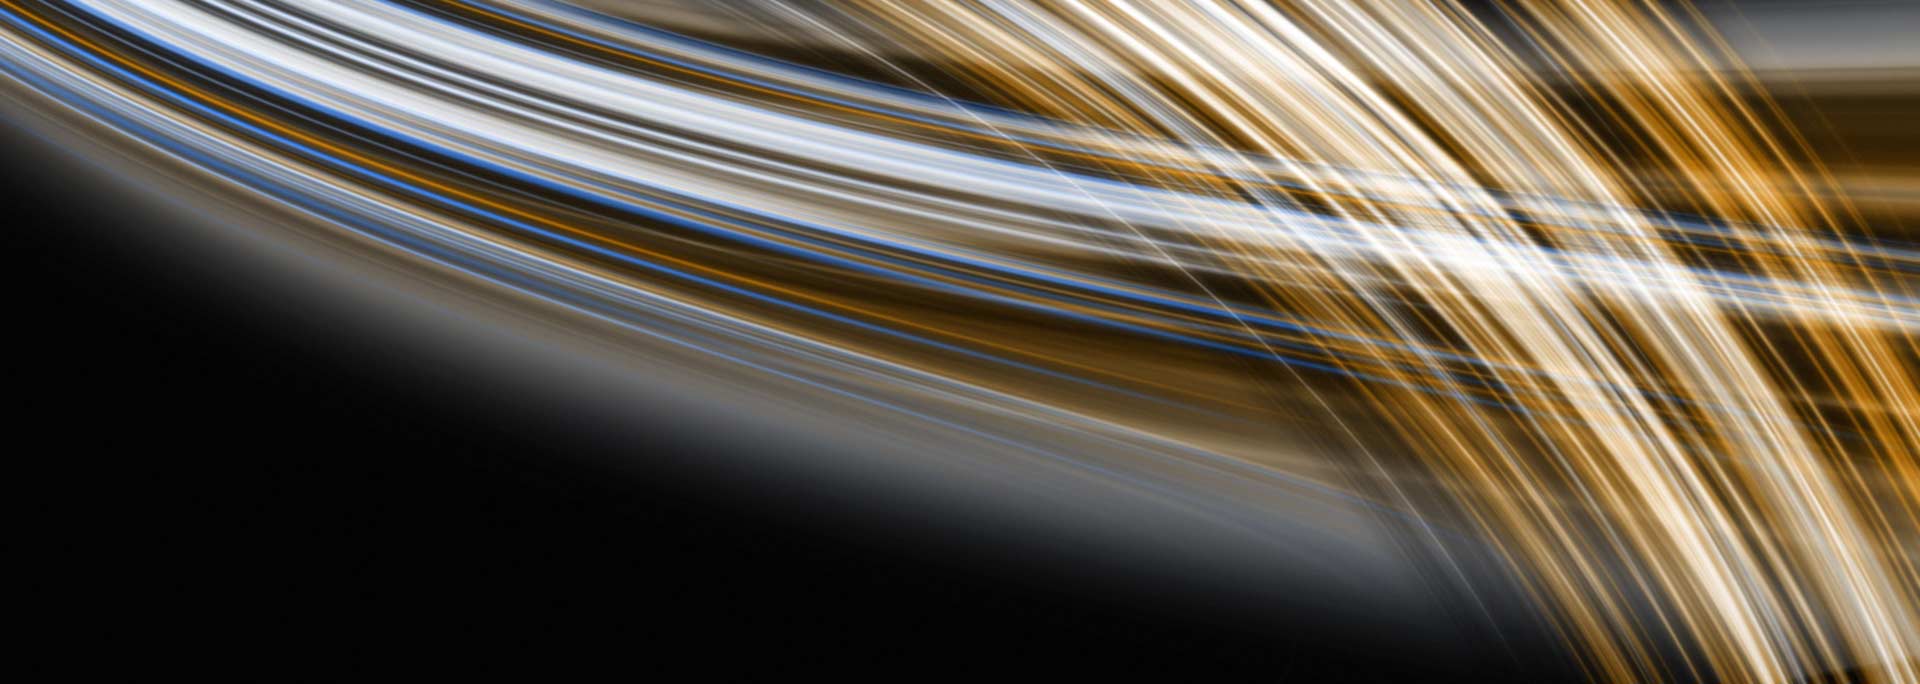 Background graphic of gray and gold wispy lines.